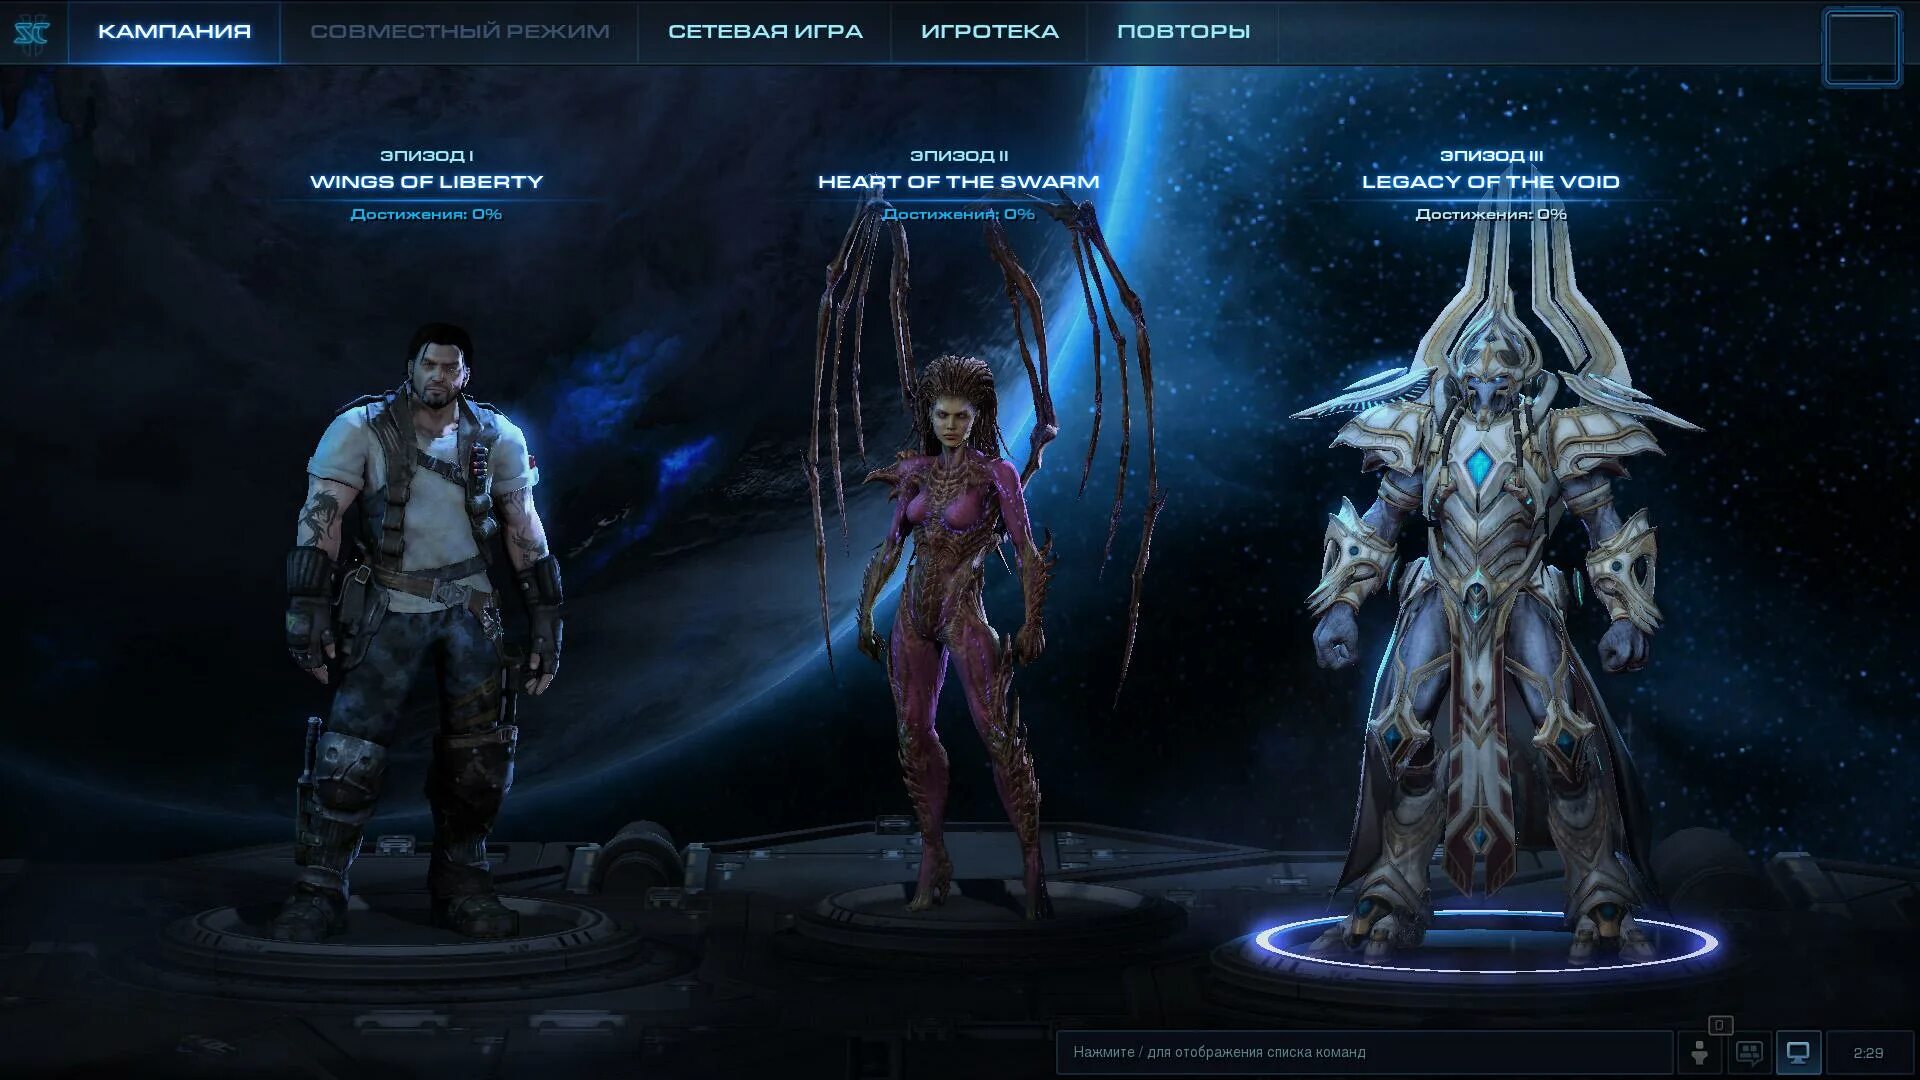 Starcraft 2 механика. Старкрафт Legacy of the Void. Меню старкрафт 2. STARCRAFT 2 Legacy of the Void. STARCRAFT 2: Legacy of the Void campaign.